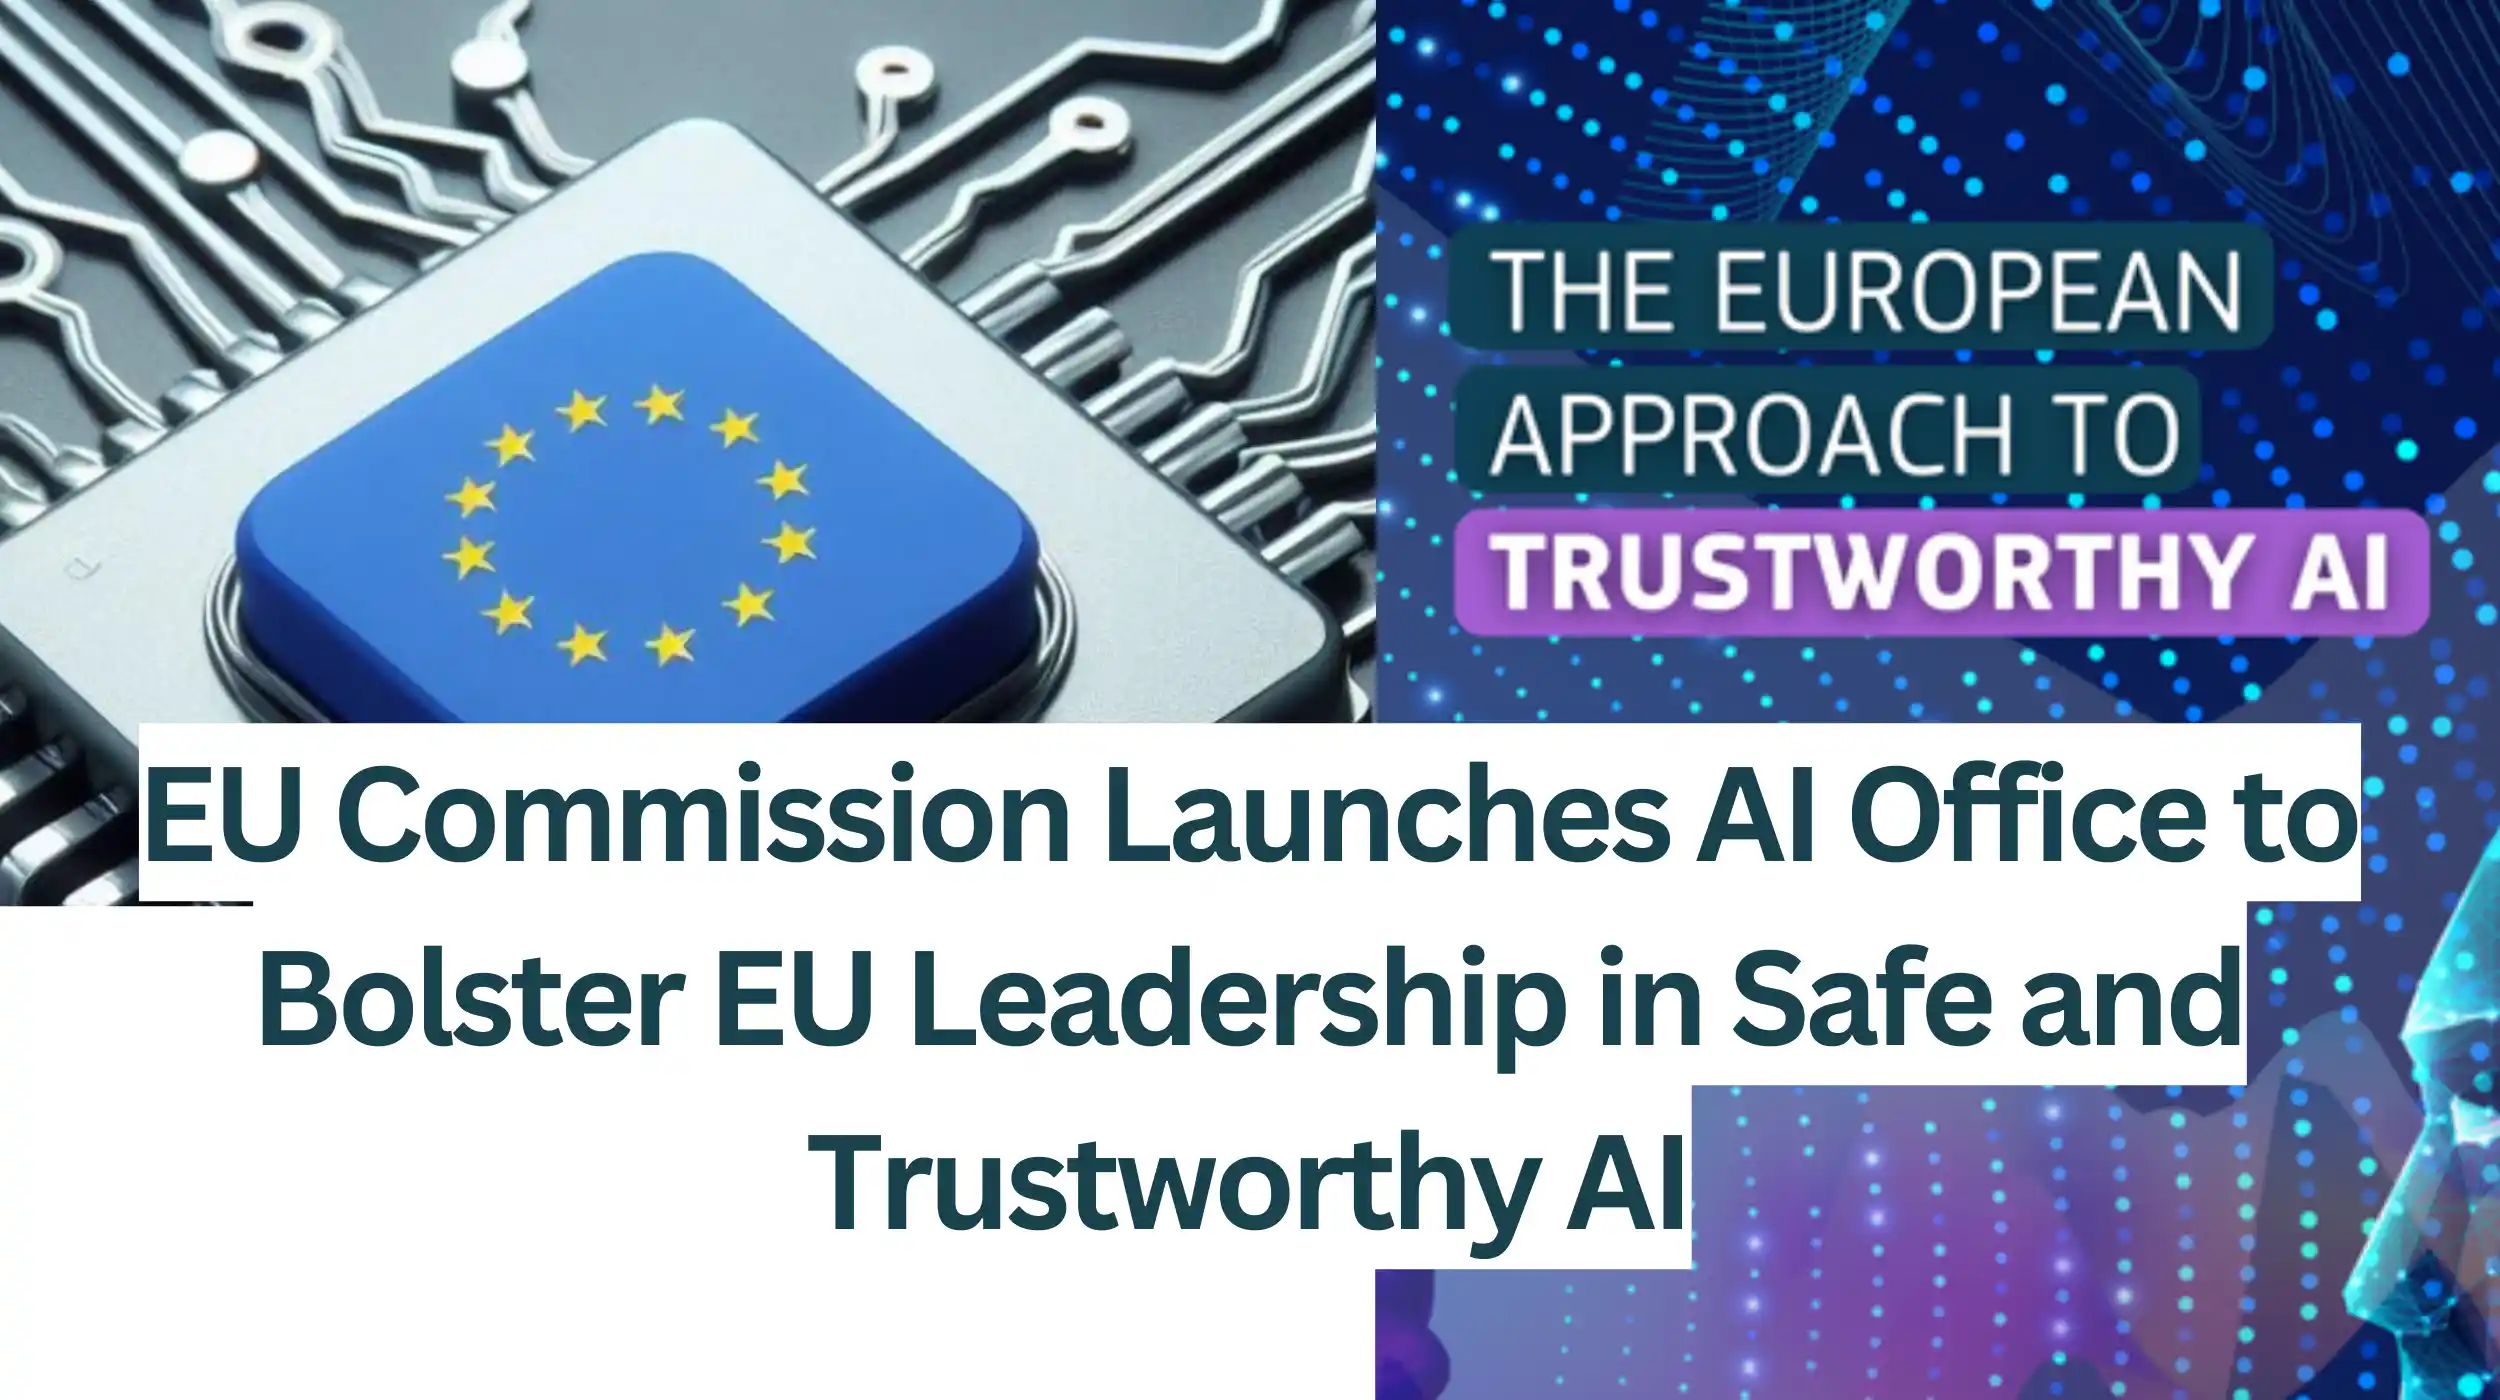 EU-Commission-Launches-AI-Office-to-Bolster-EU-Leadership-in-Safe-and-Trustworthy-AI